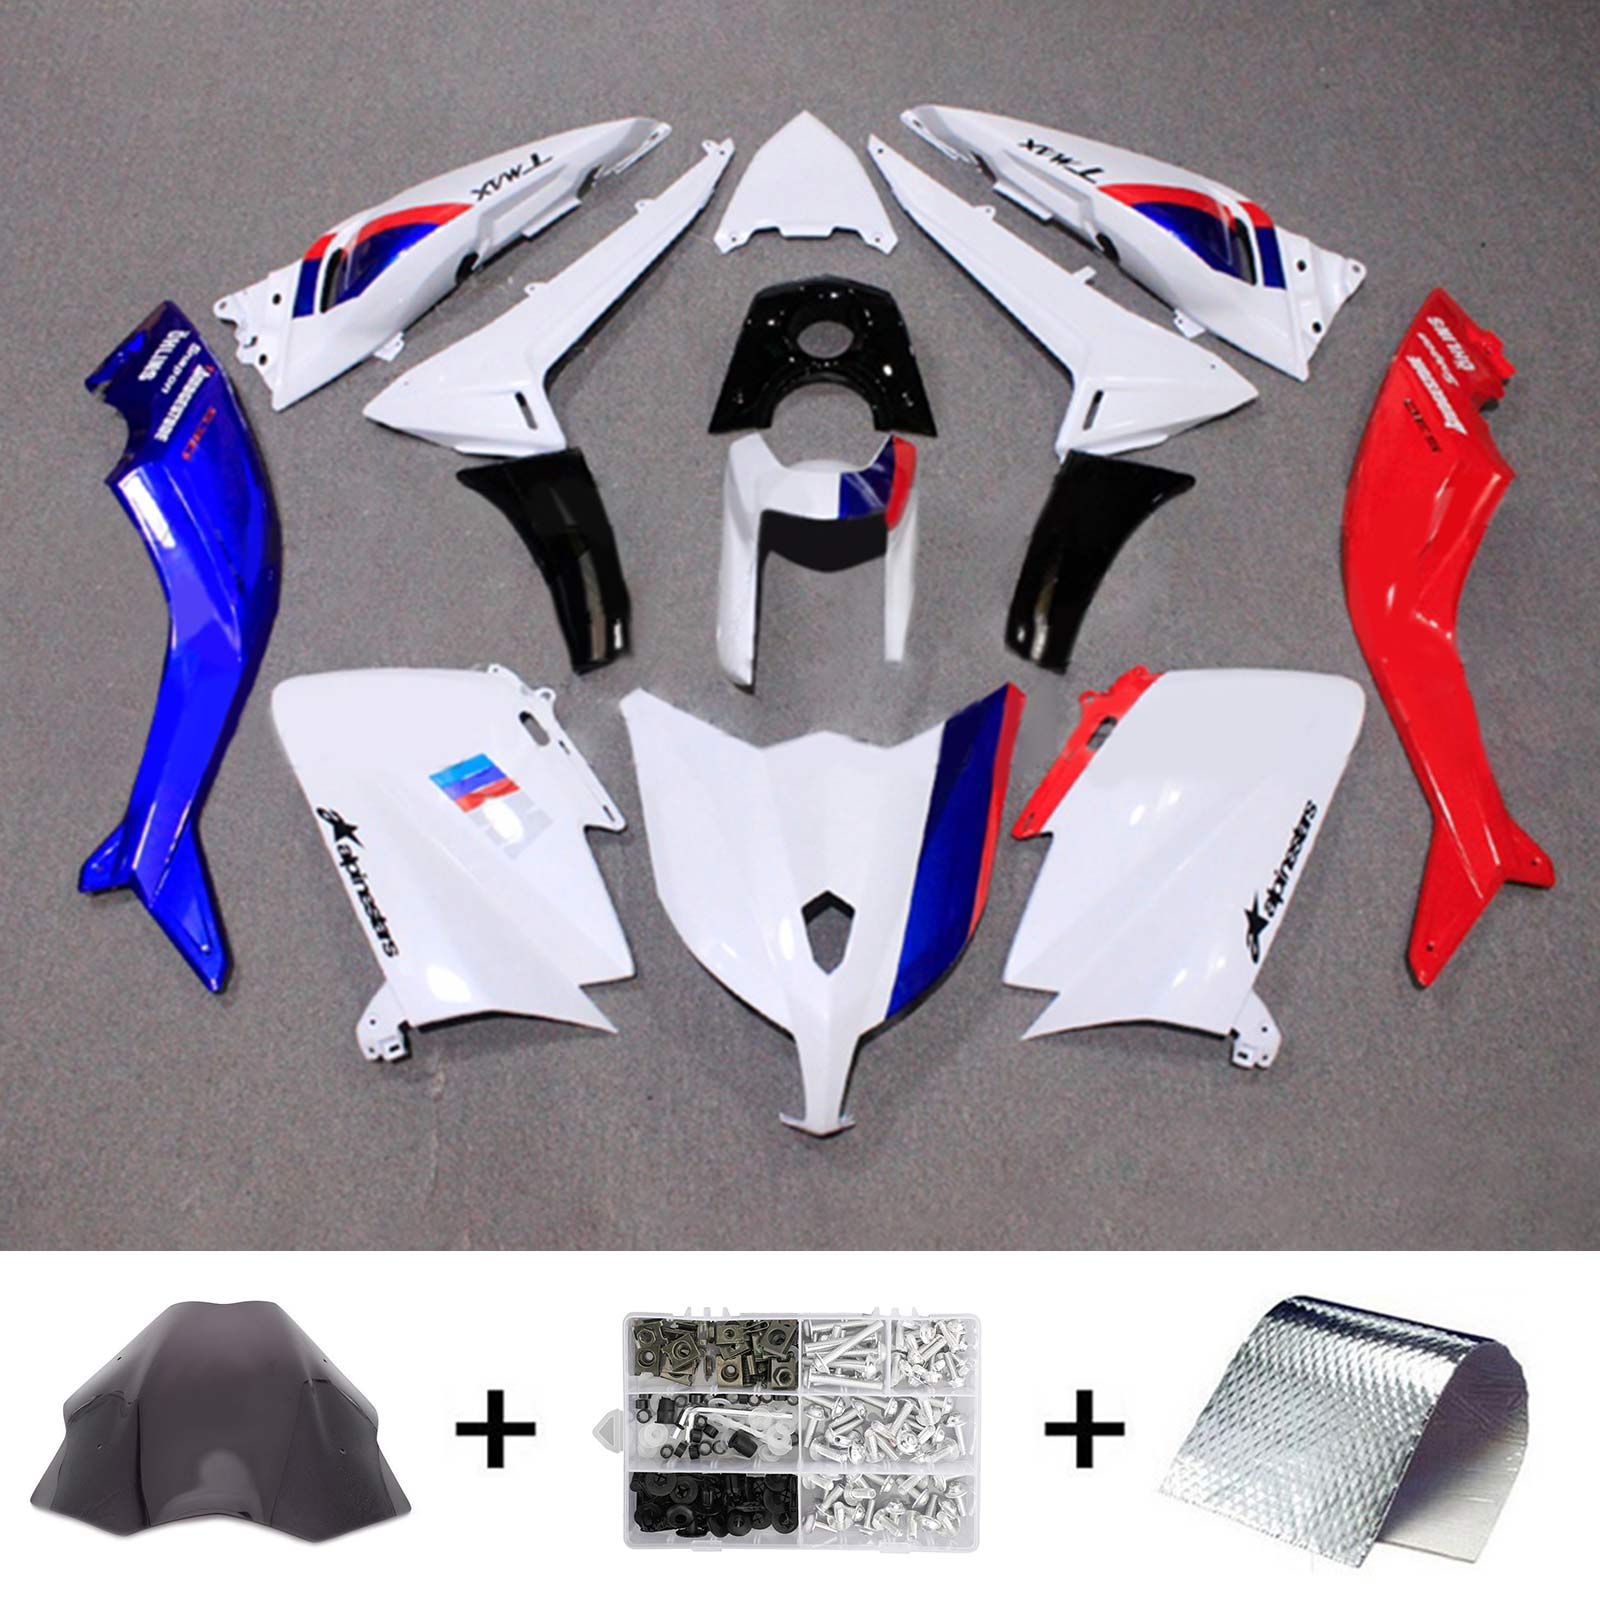 Amotopart 2012-2014 T-Max TMAX530 Yamaha Red&Blue Style1 Fairing Kit